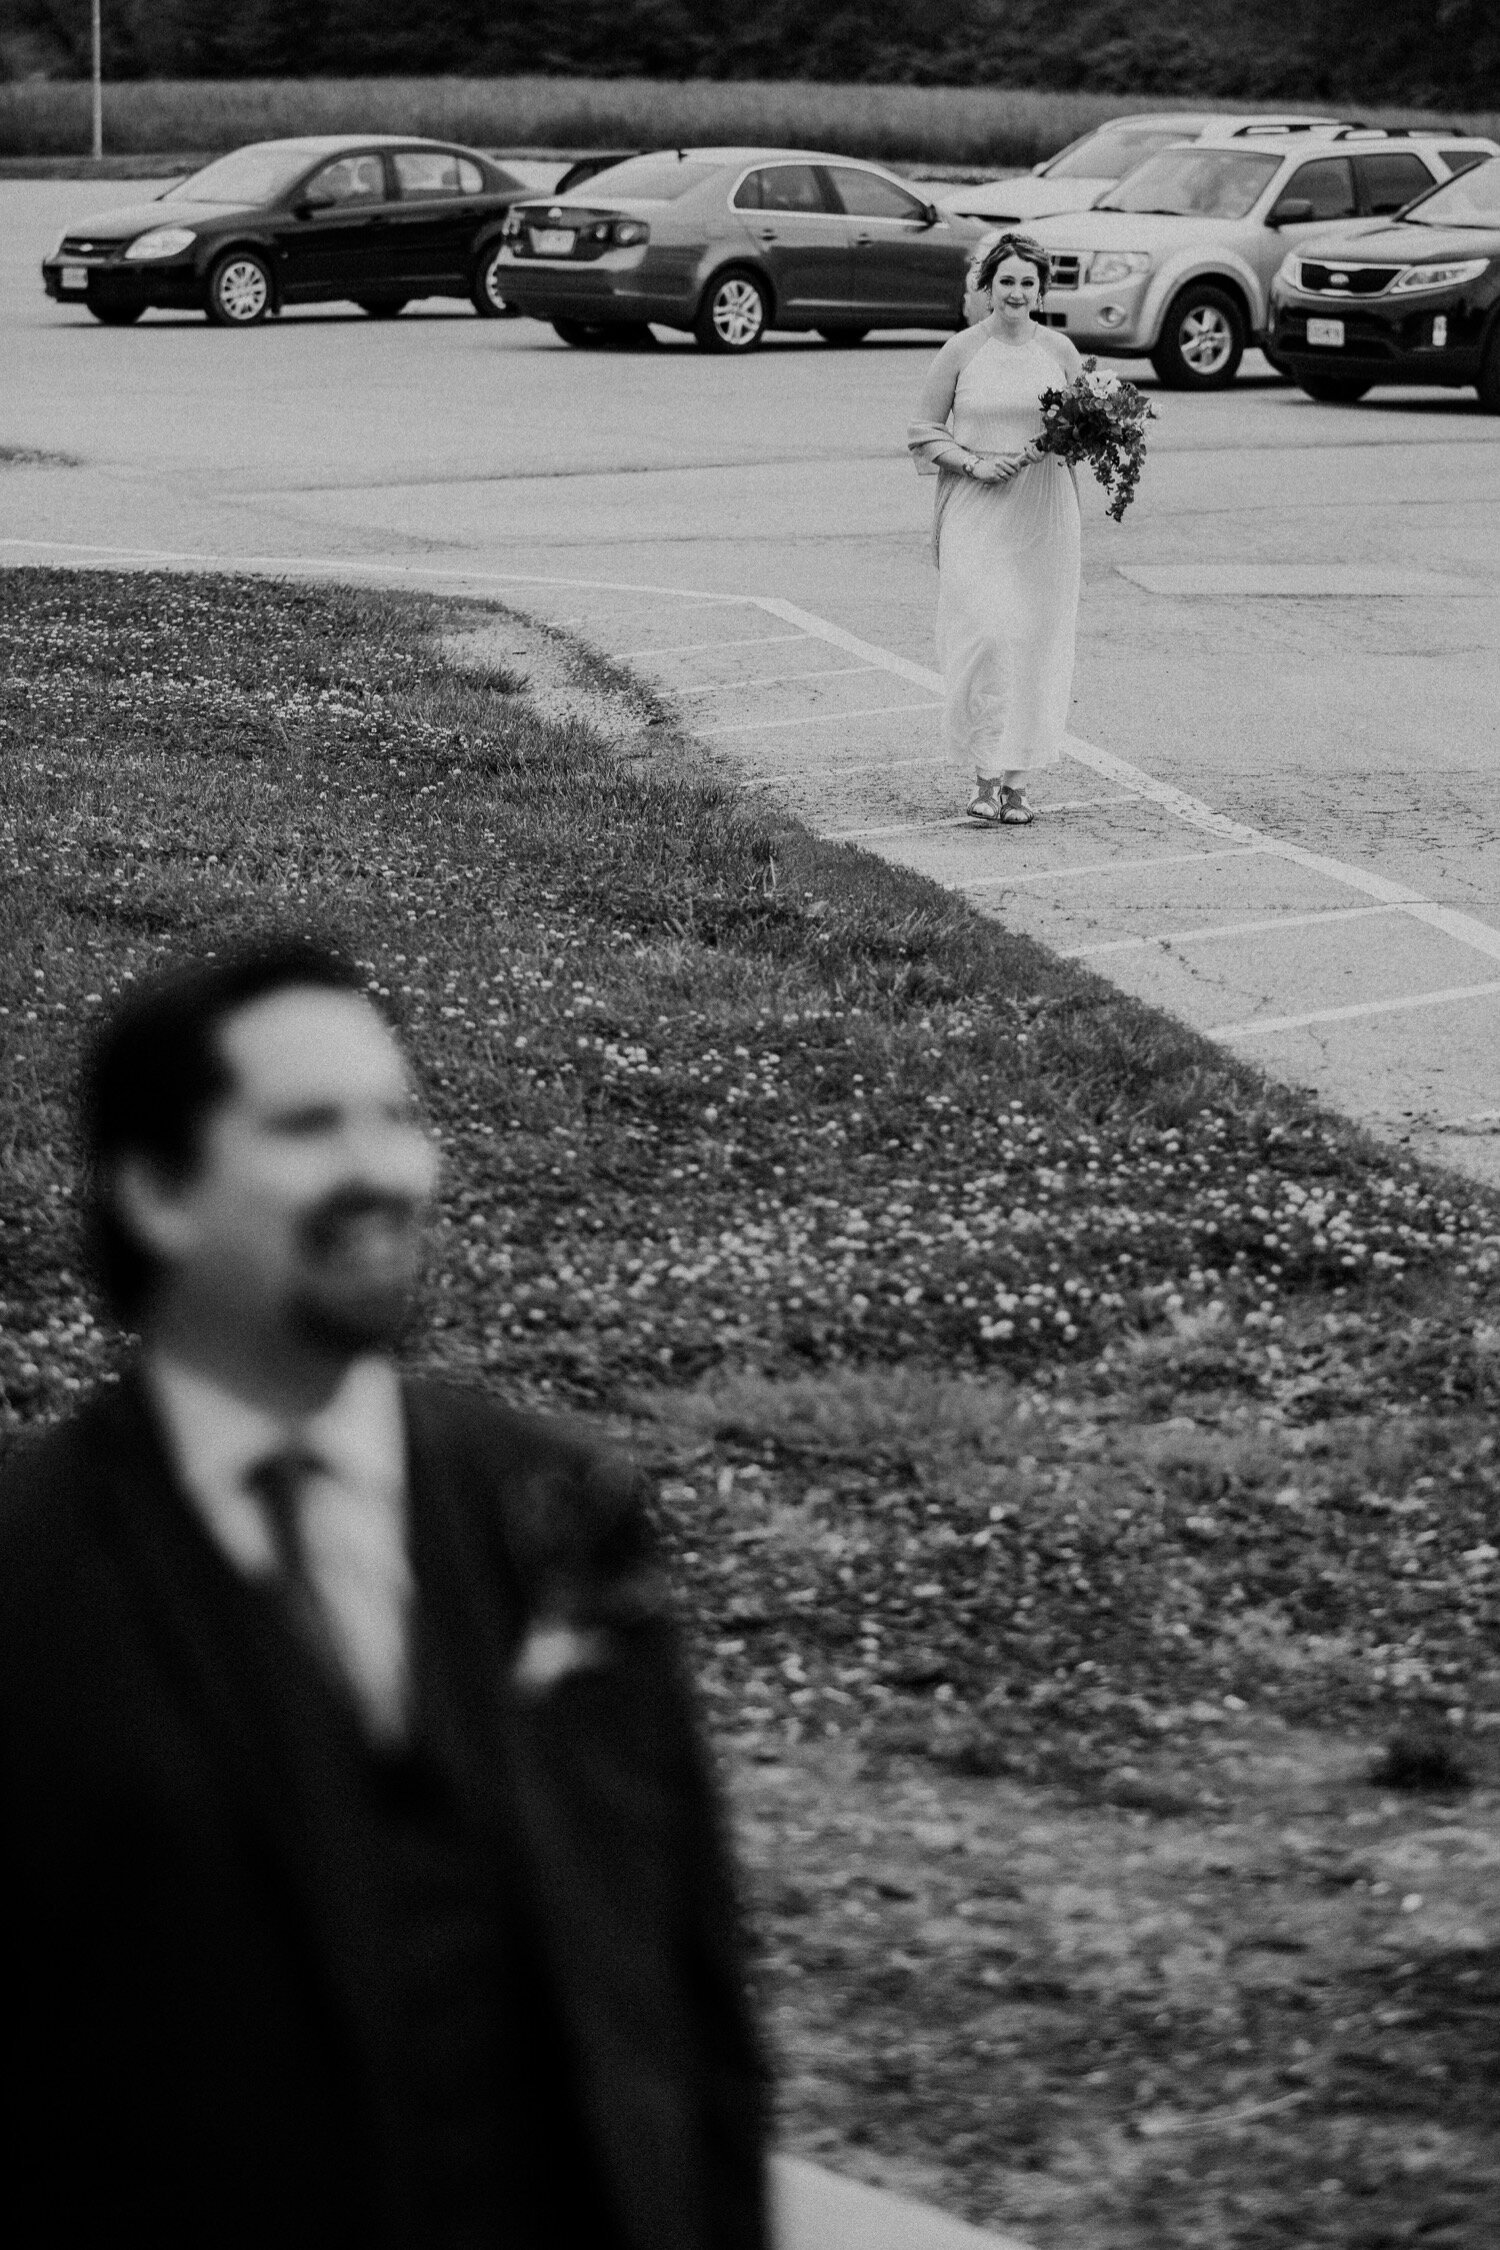 02_Maris&Lucas-3-2_Spring Elopement wedding at Belvoir Winery and Inn in Kansas City, Missouri photographed by Kelsey Diane Photography.jpg